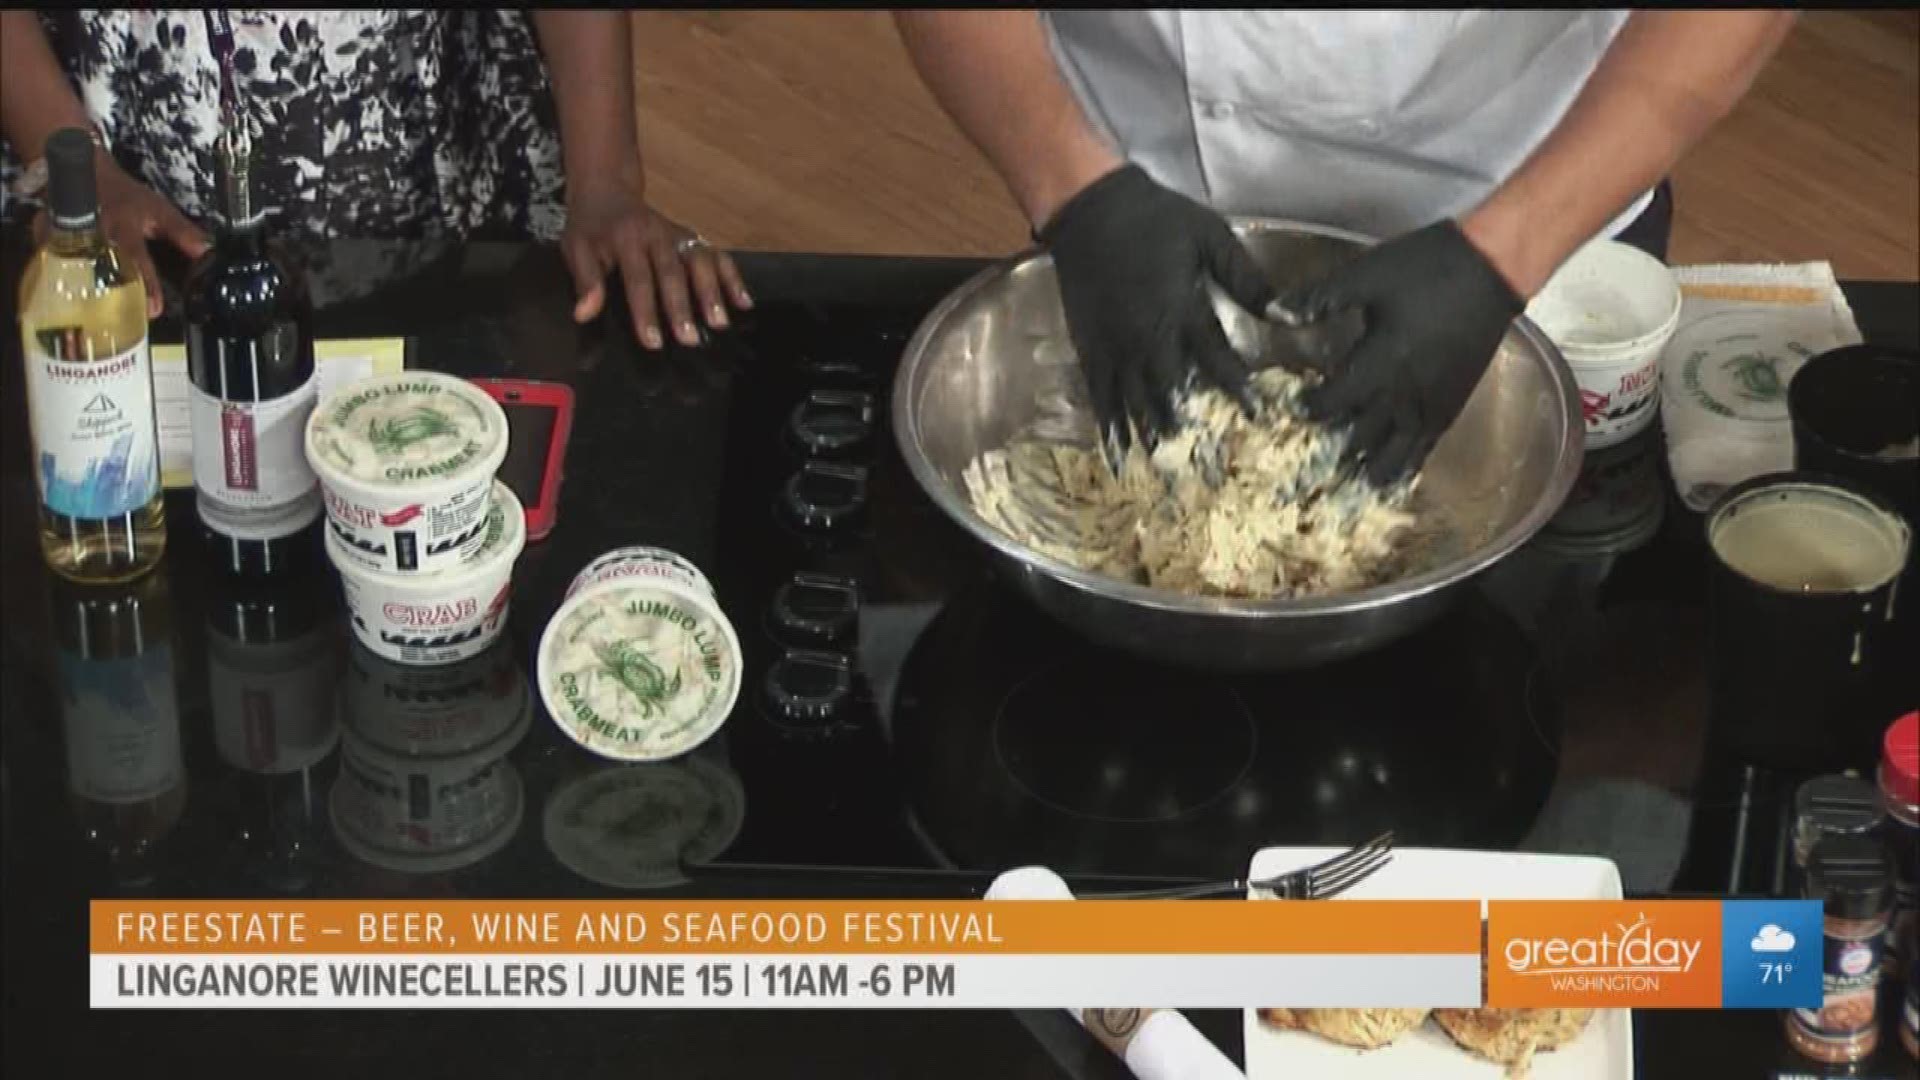 Linganore Winecellars' Anthony Aellen shares information about the FreeState Festival on June 15th and one of the featured food vendors chef Antonios Minadakis with Jimmy’s Famous Seafood in Baltimore makes a delicious crab cake!